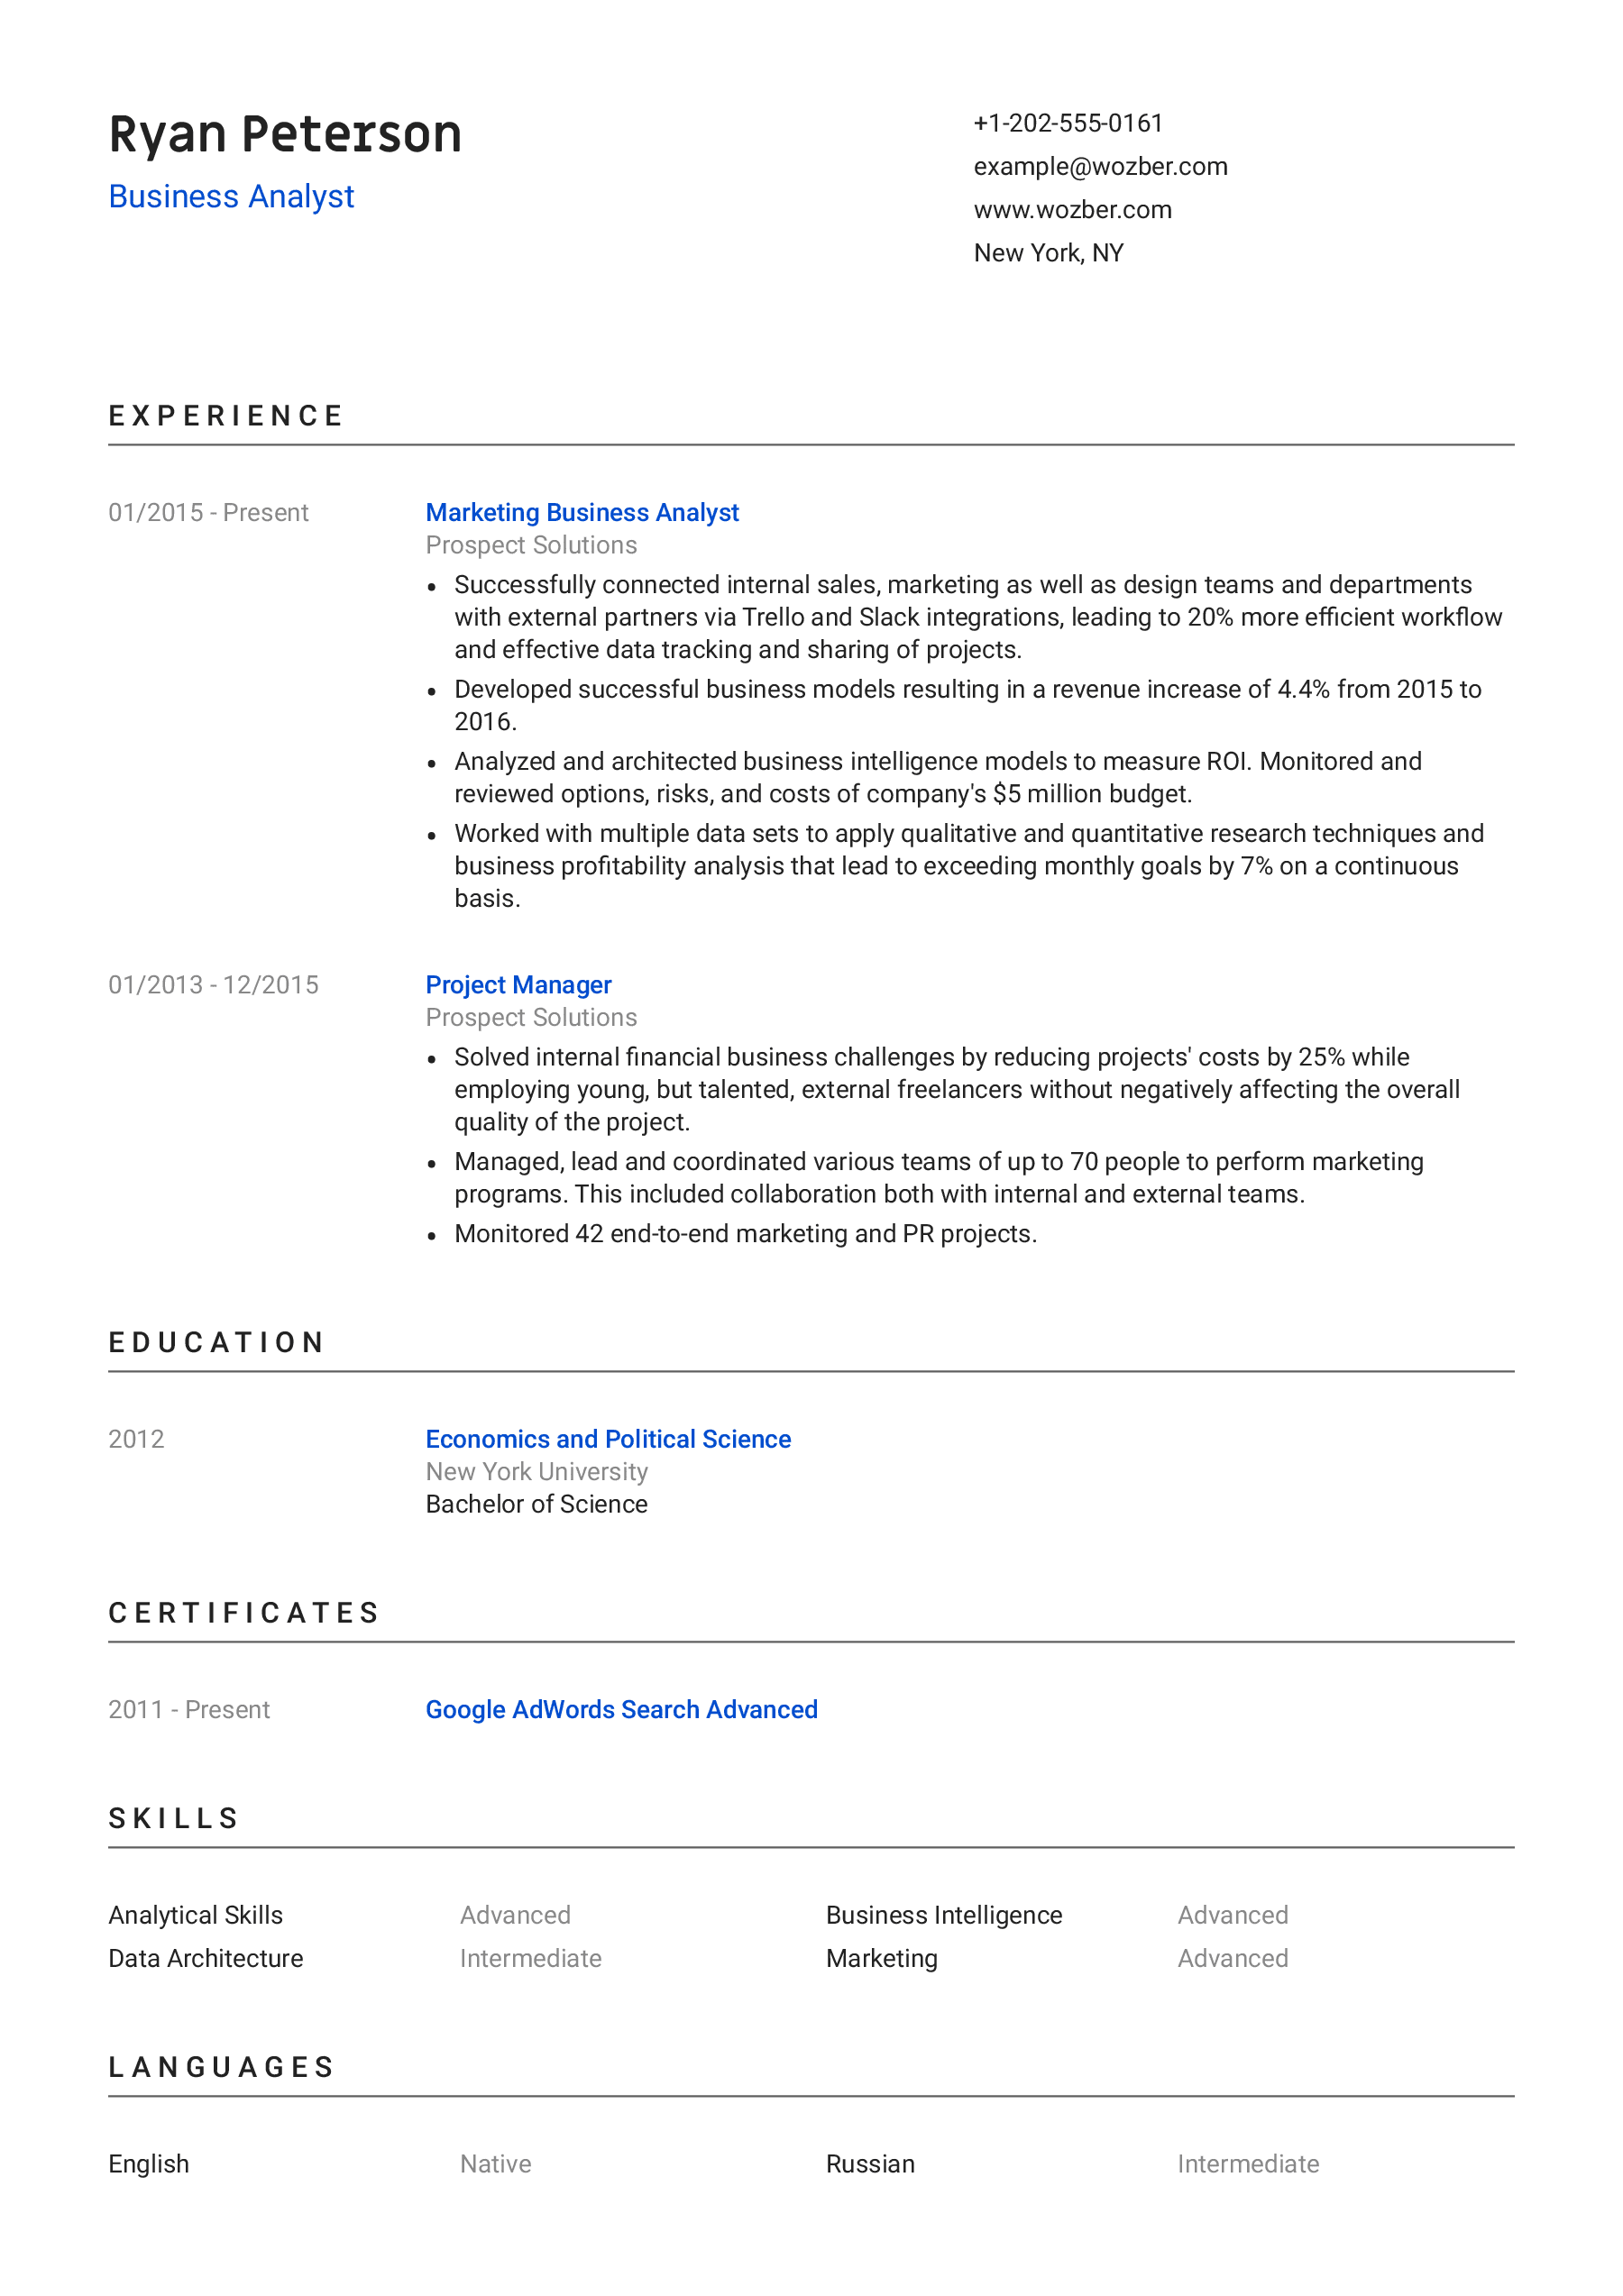 Business-analyst resume template